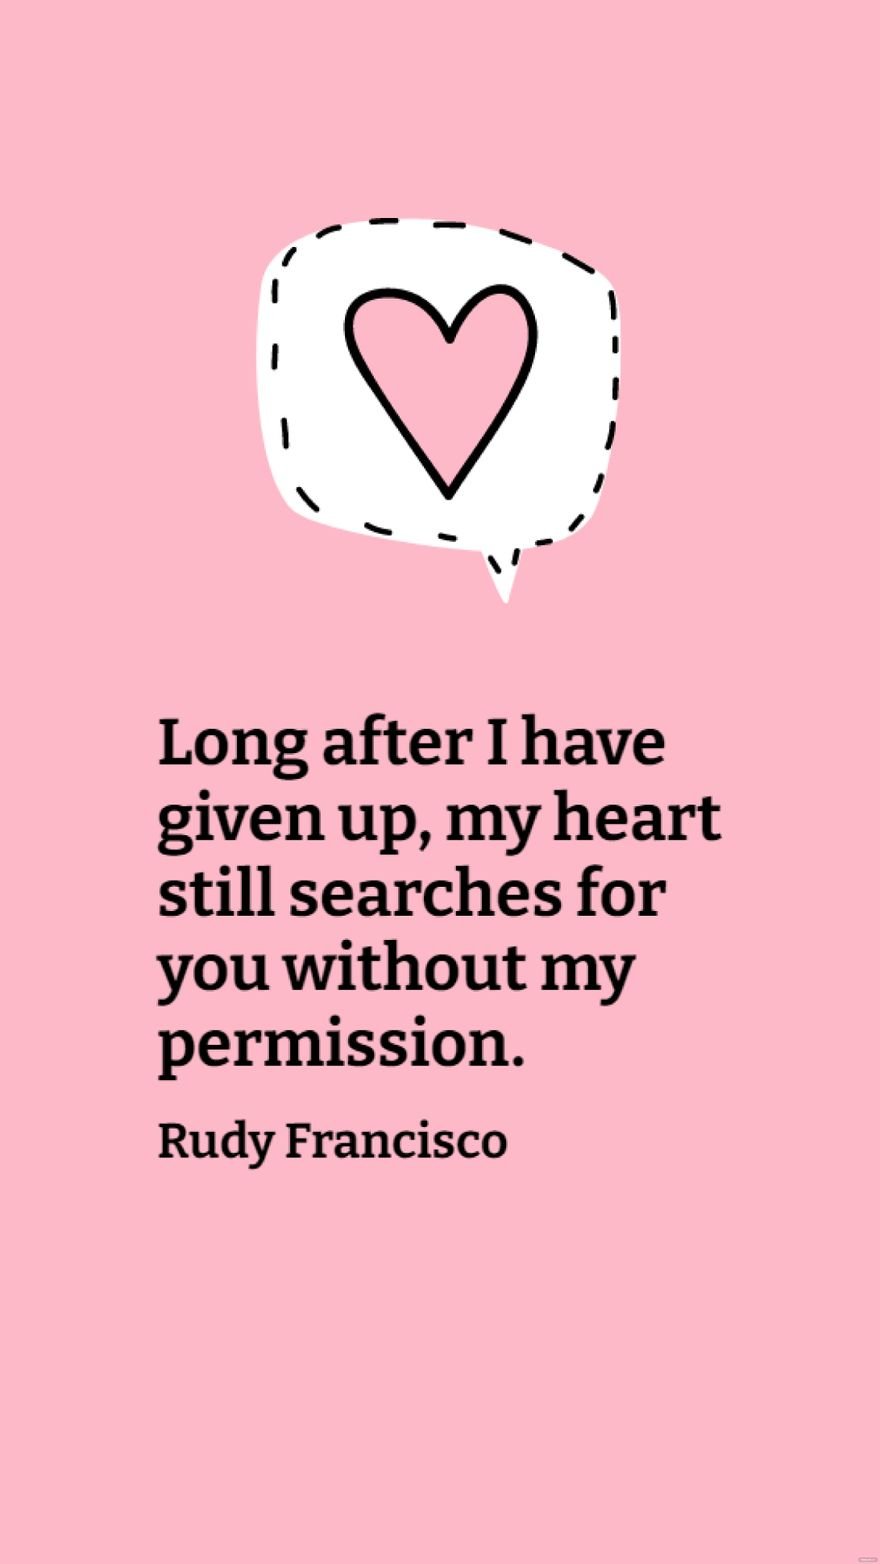 Free Rudy Francisco - Long after I have given up, my heart still searches for you without my permission. in JPG